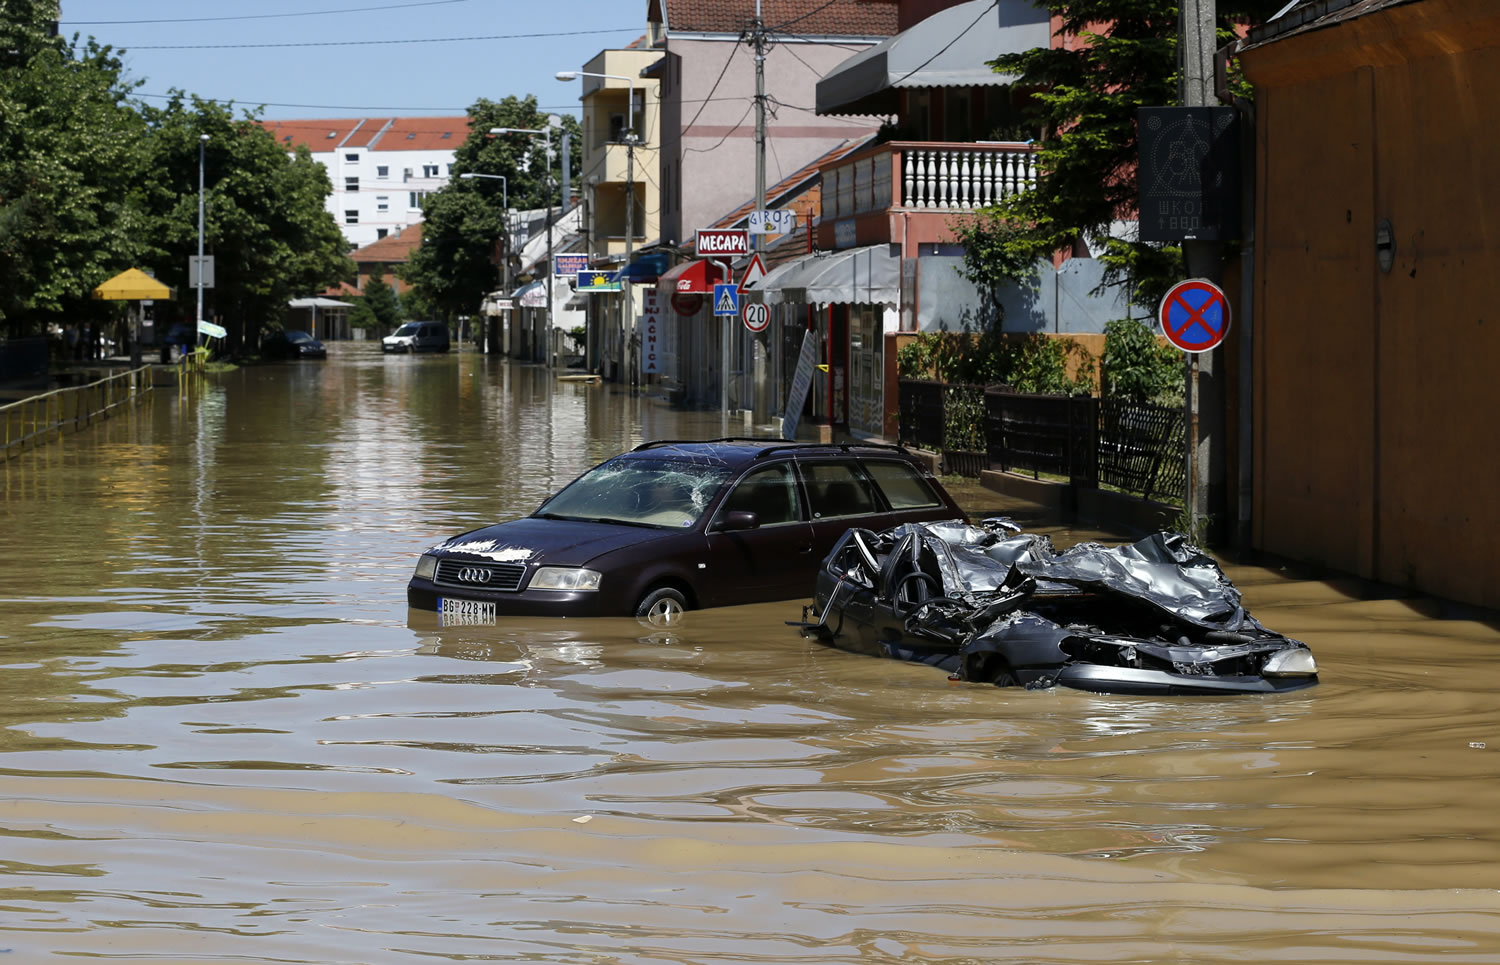 A severely damaged car  stands in a flooded street in Obrenovac, some 30 kilometers (18 miles) southwest of Belgrade, Serbia, on Monday.